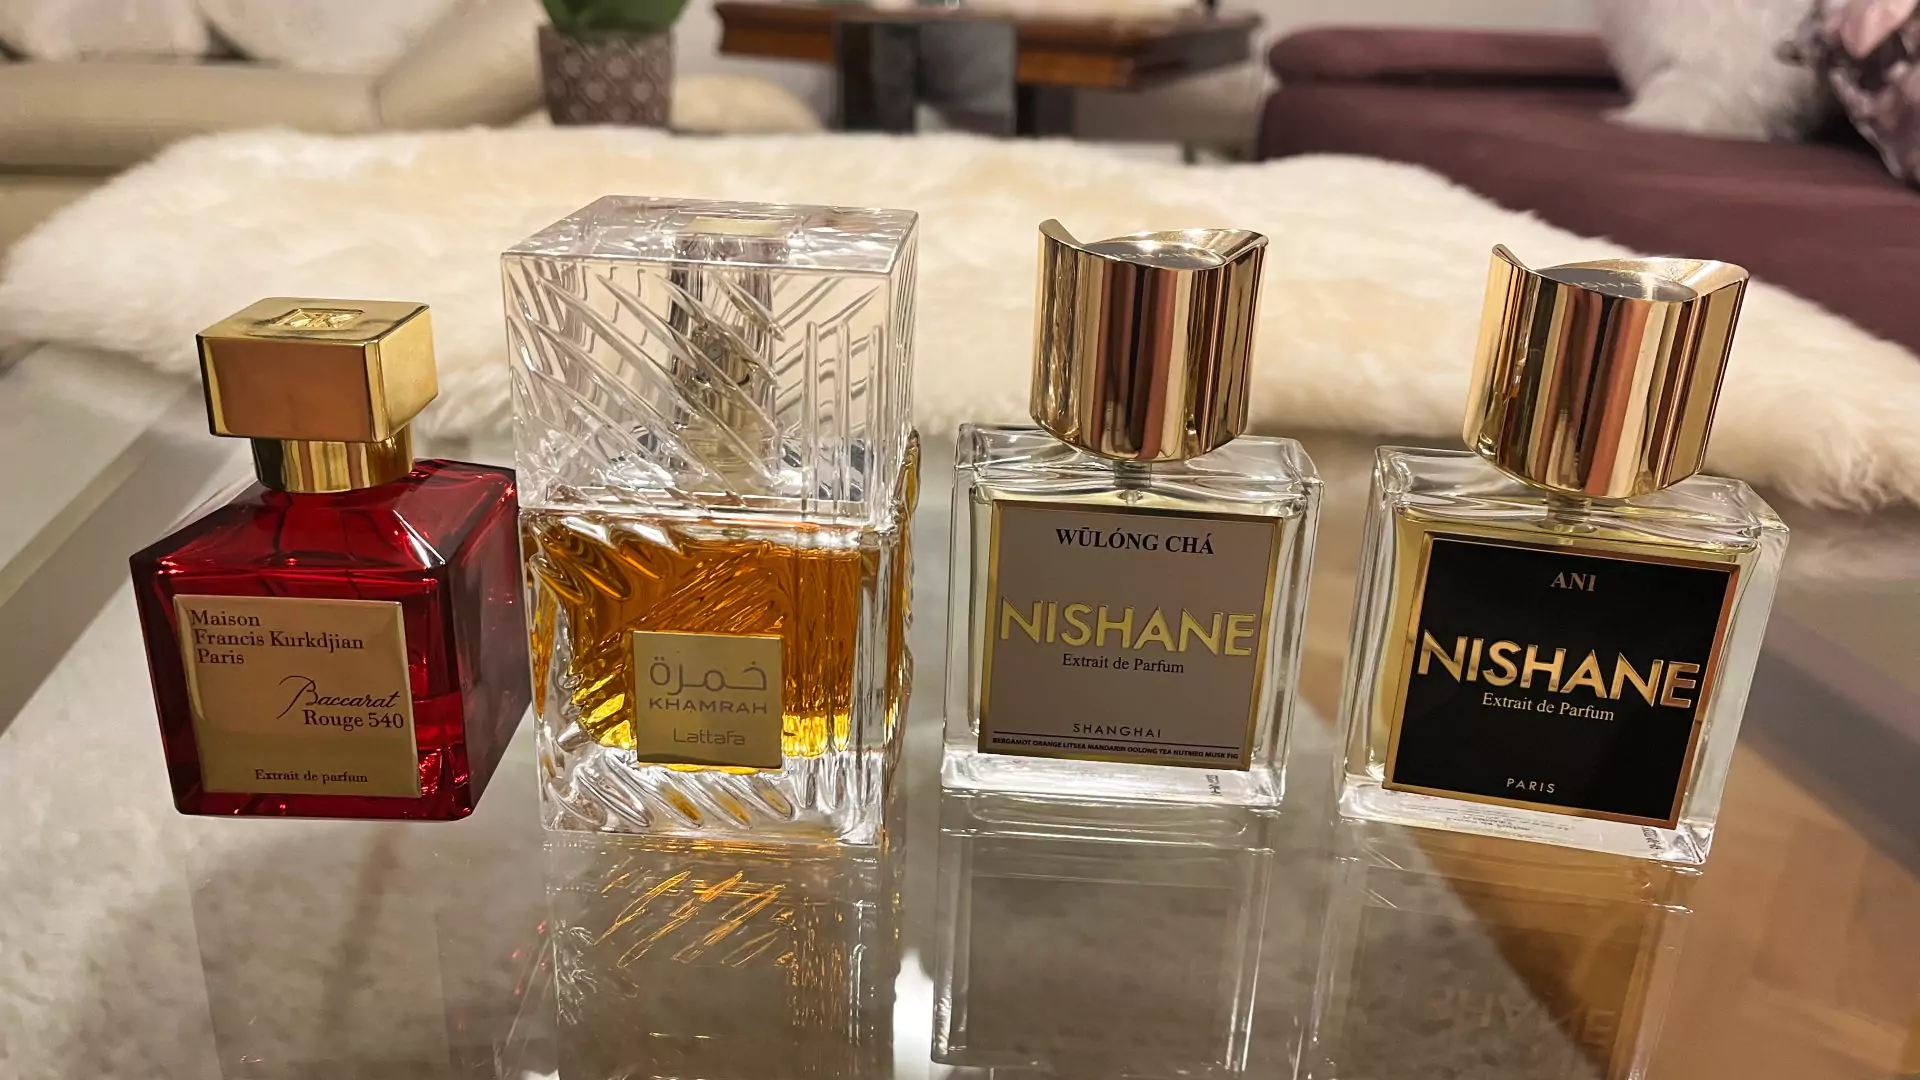 Some of my favorite fragrances are unisex